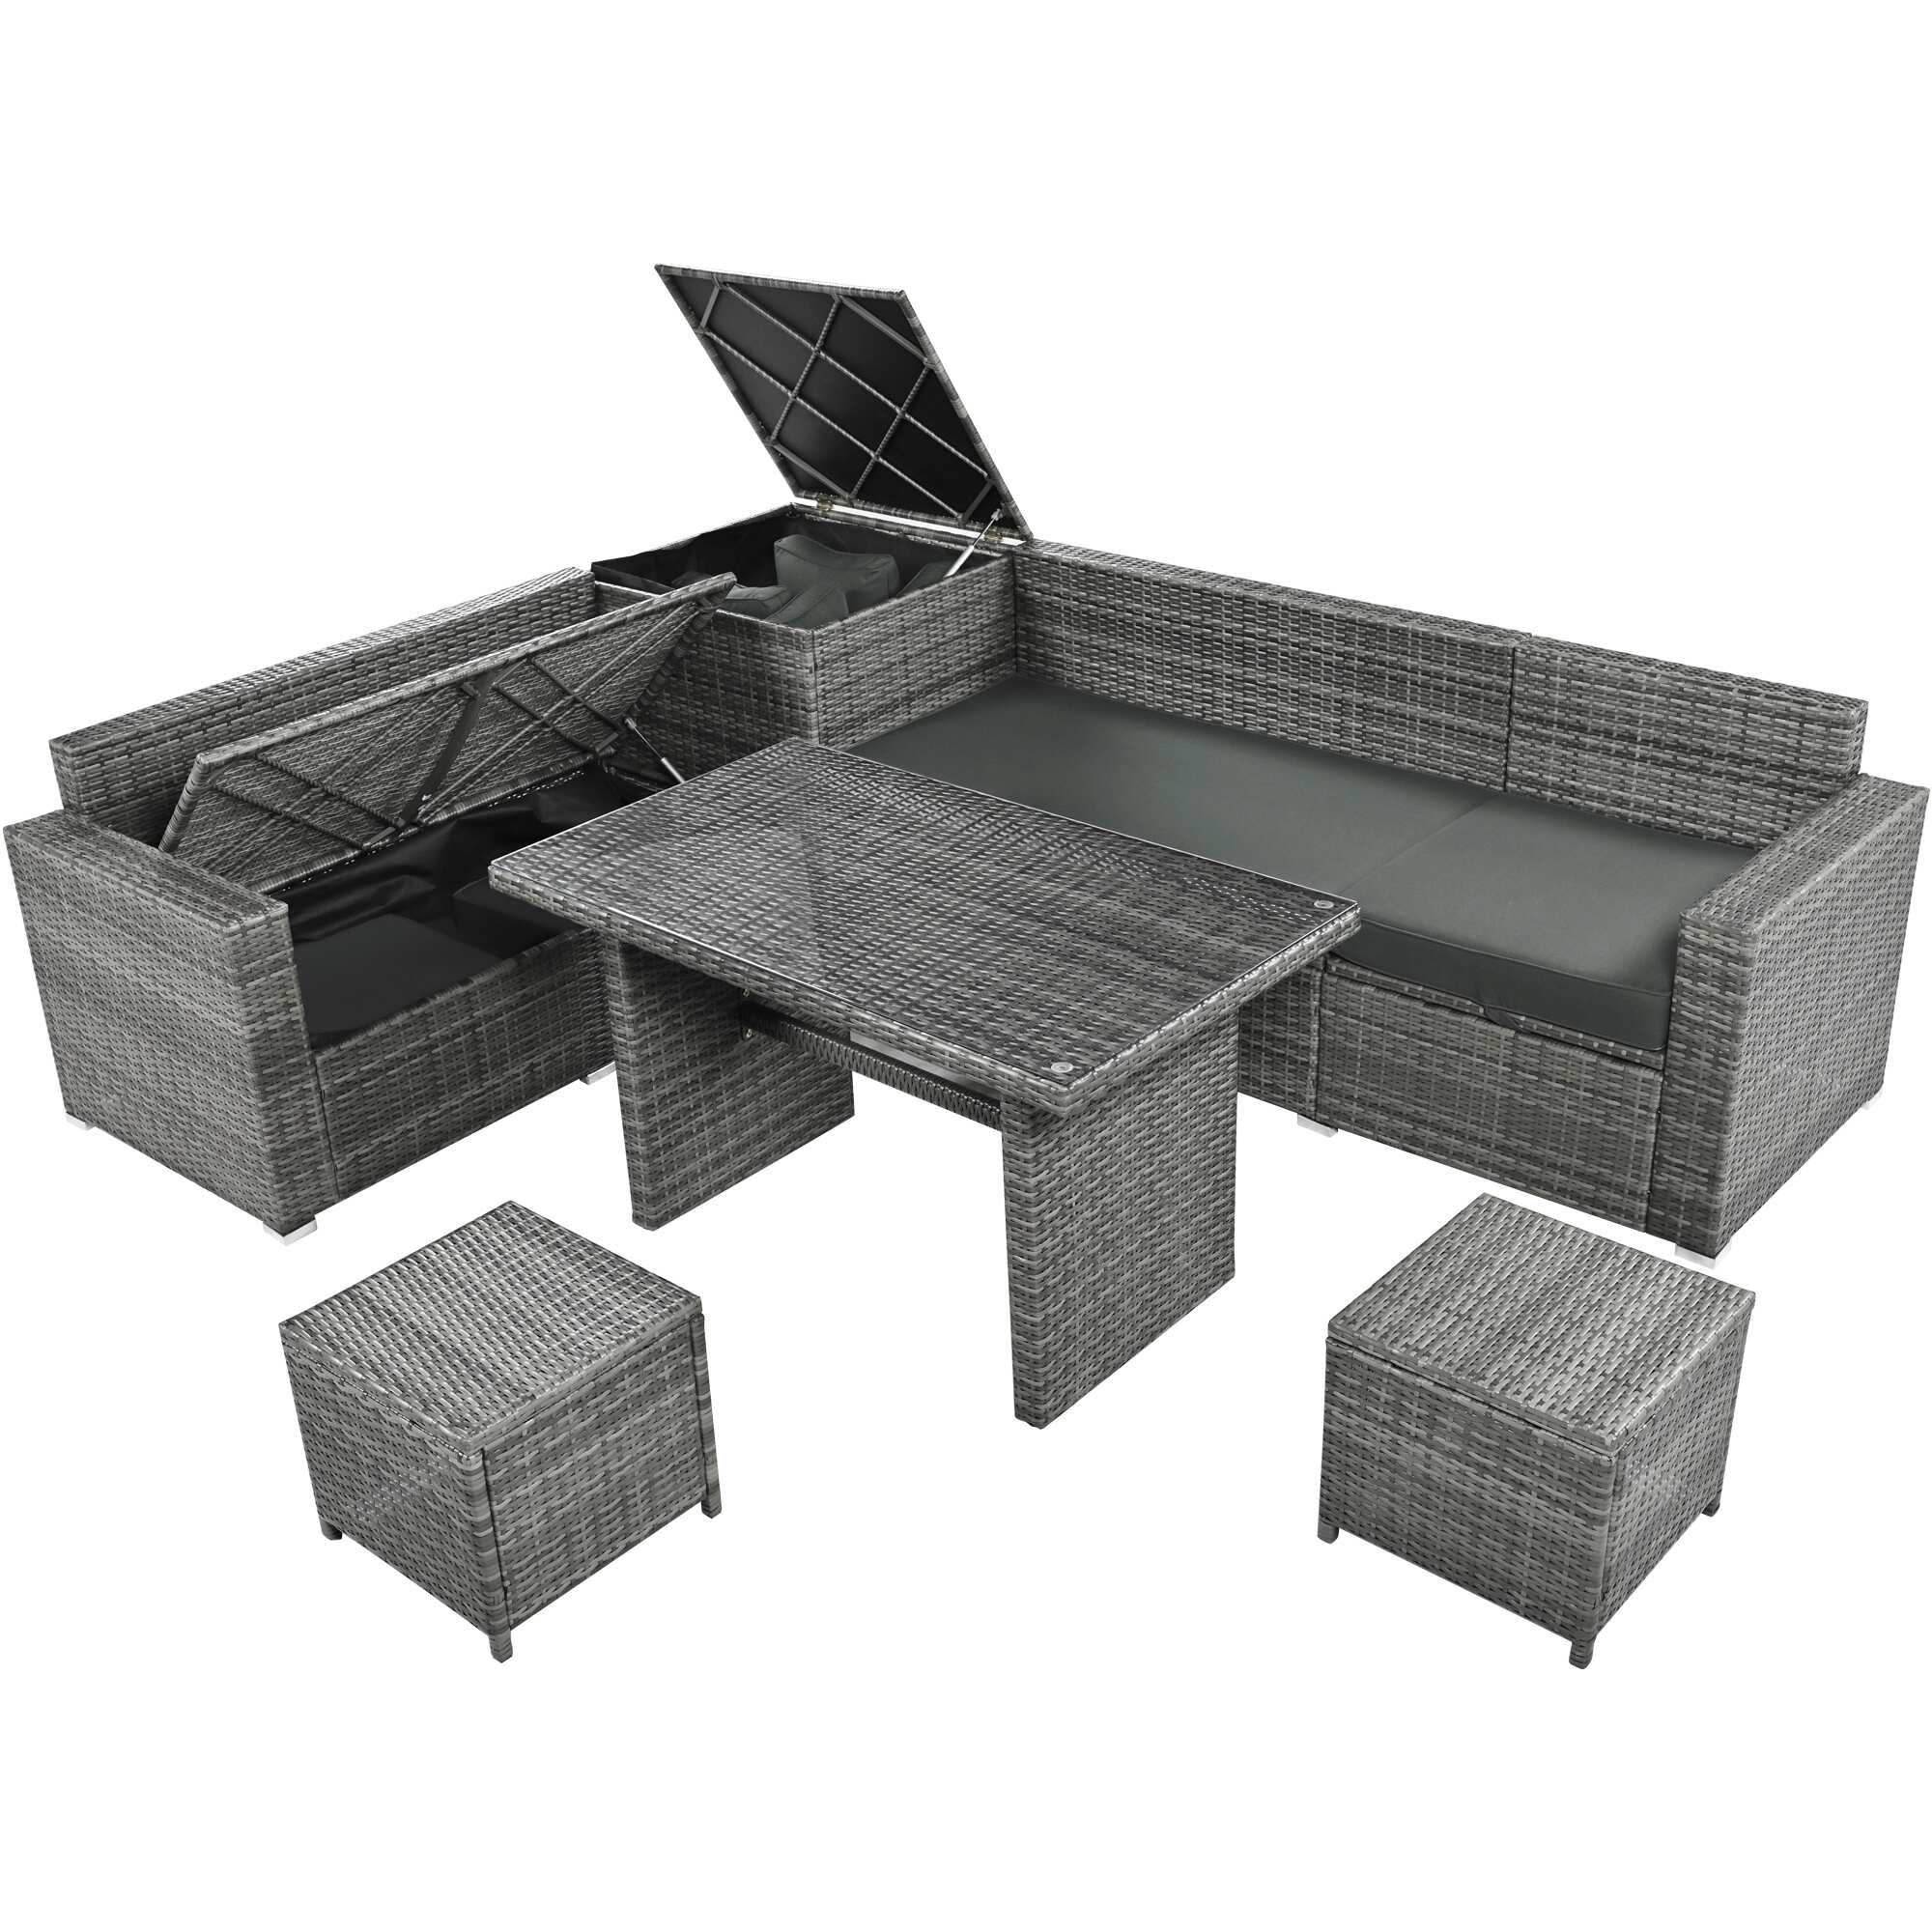 All-Weather PE Hand-Woven Wicker Sectional Sofa Set with Adjustable Seat, Storage Box, and Removable Covers